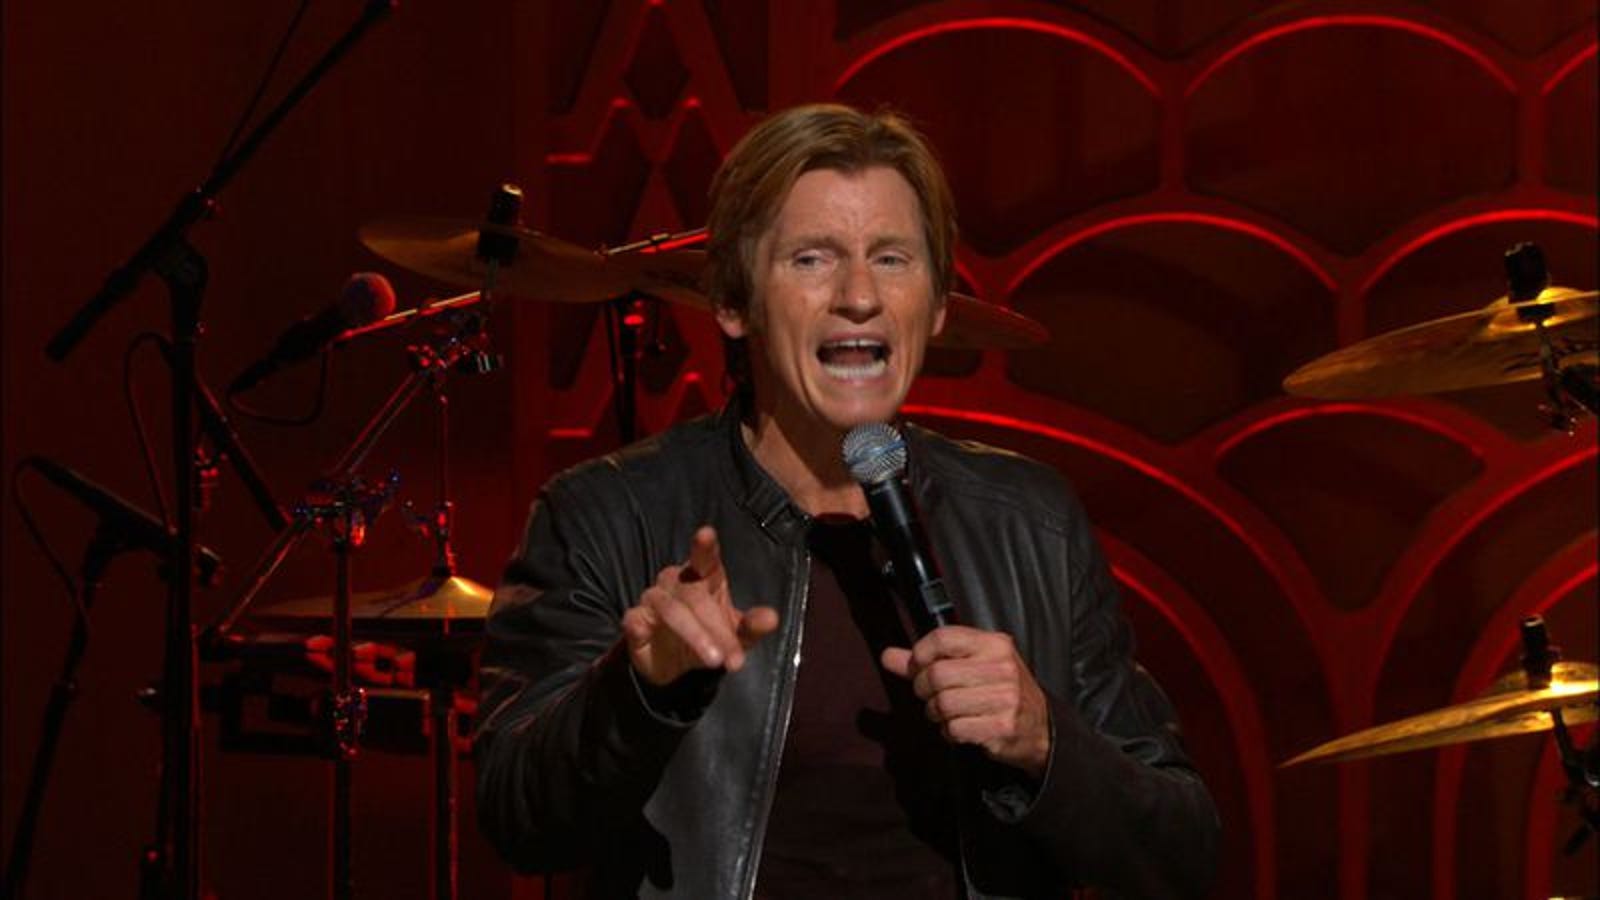 Denis Leary To Play A Washed Up Rock Singer Named Johnny Rock For Fx